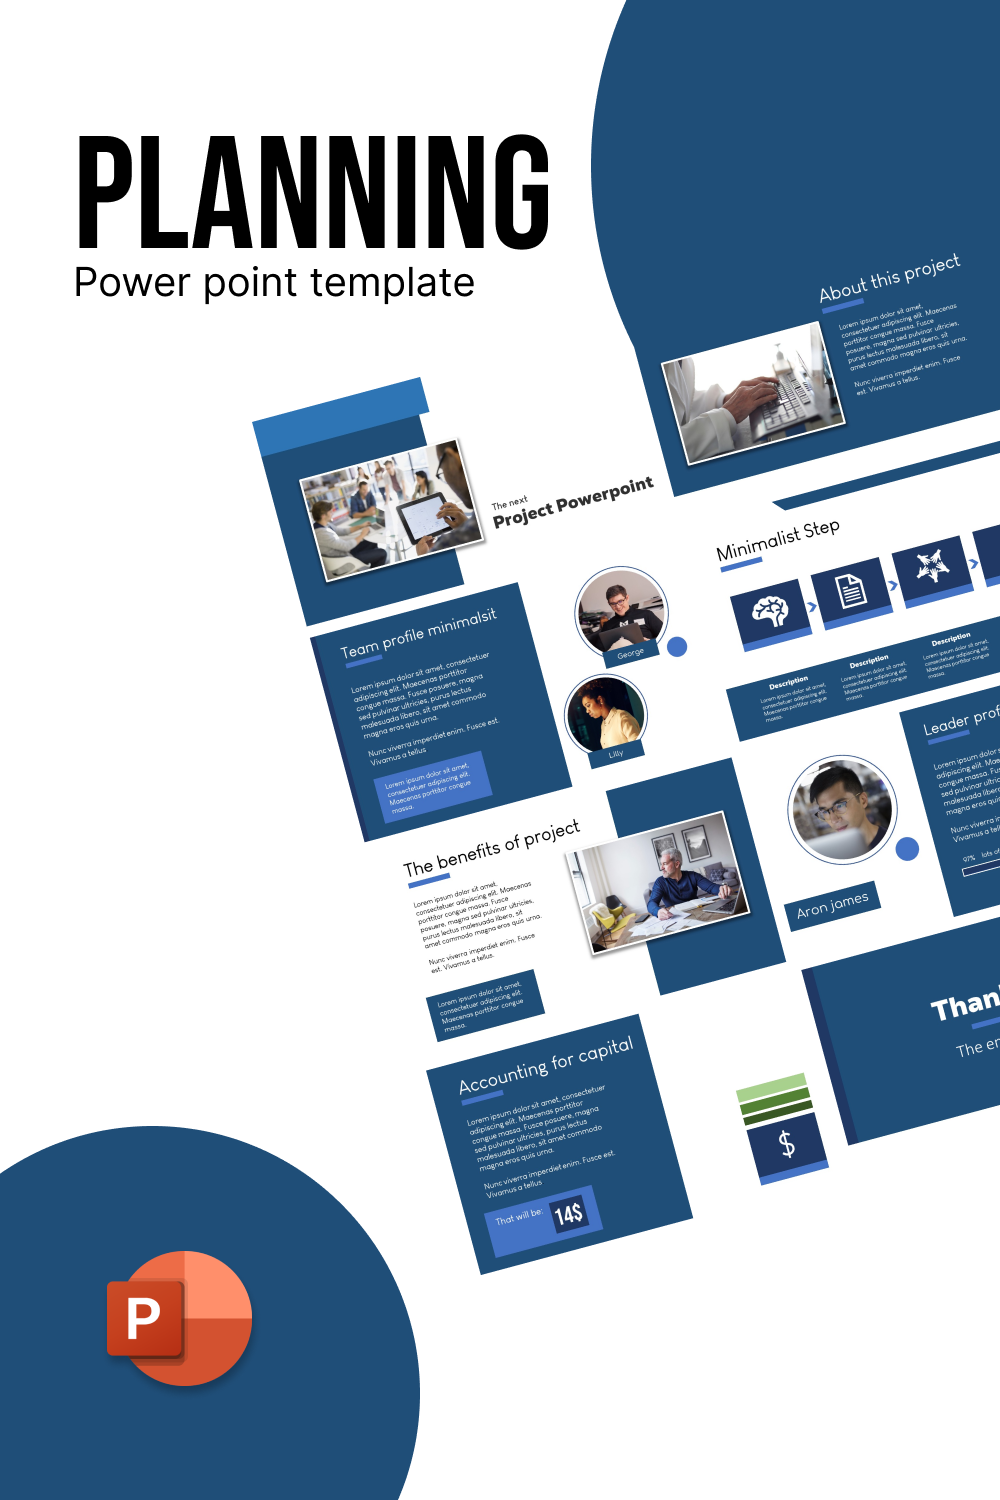 Planning Powerpoint template pinterest preview image.